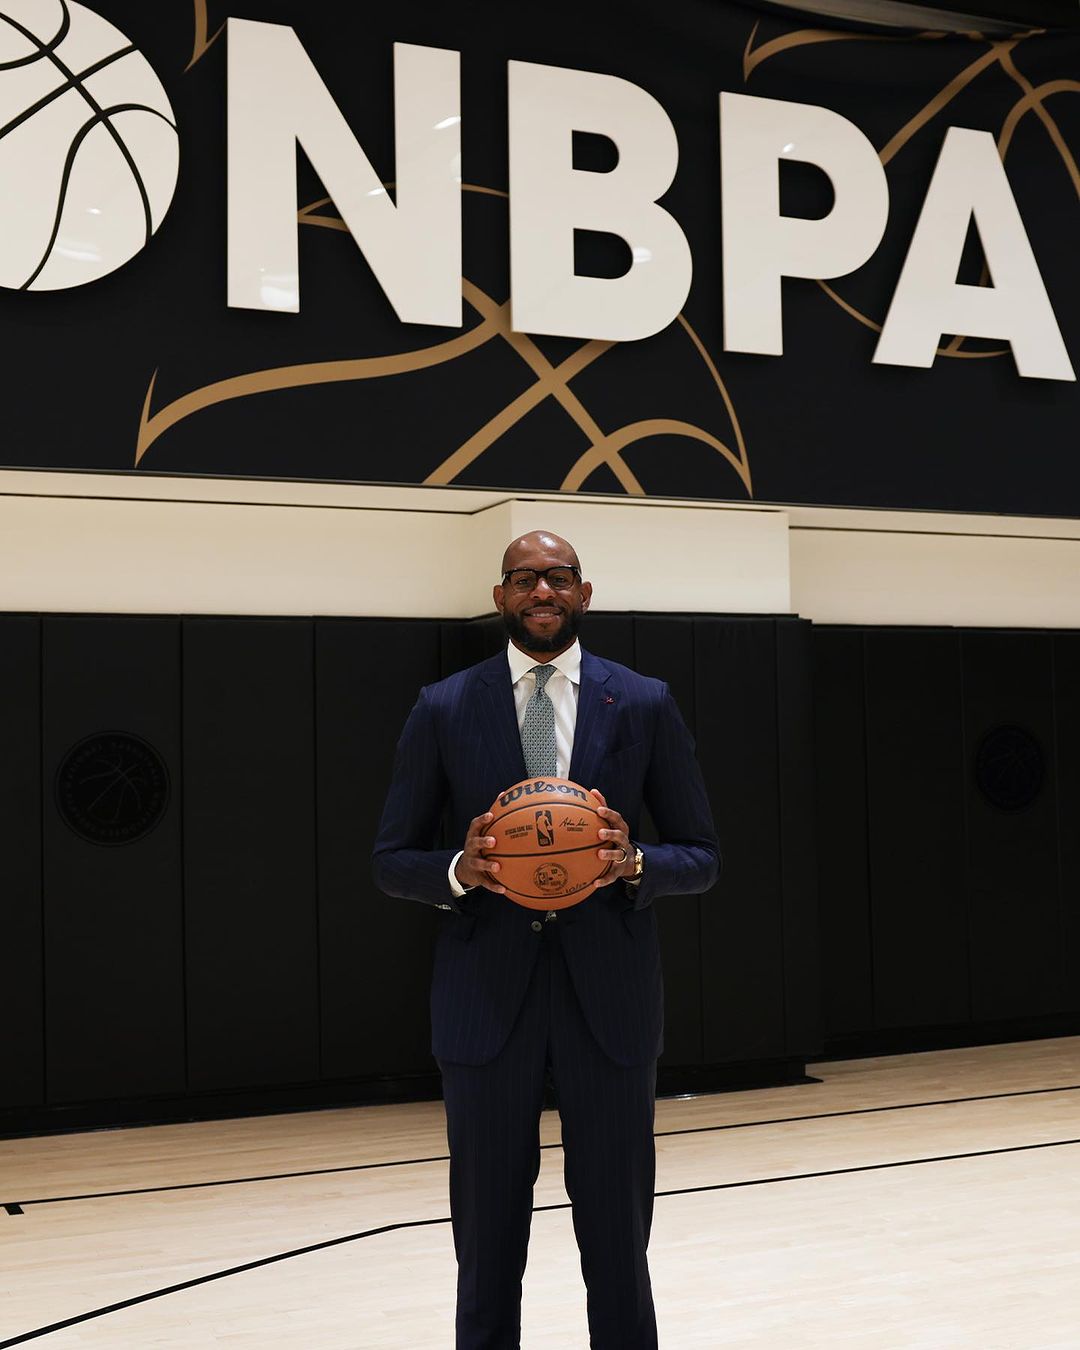 First Day In Office For NBPA Acting Executive Director Andre Iguodala